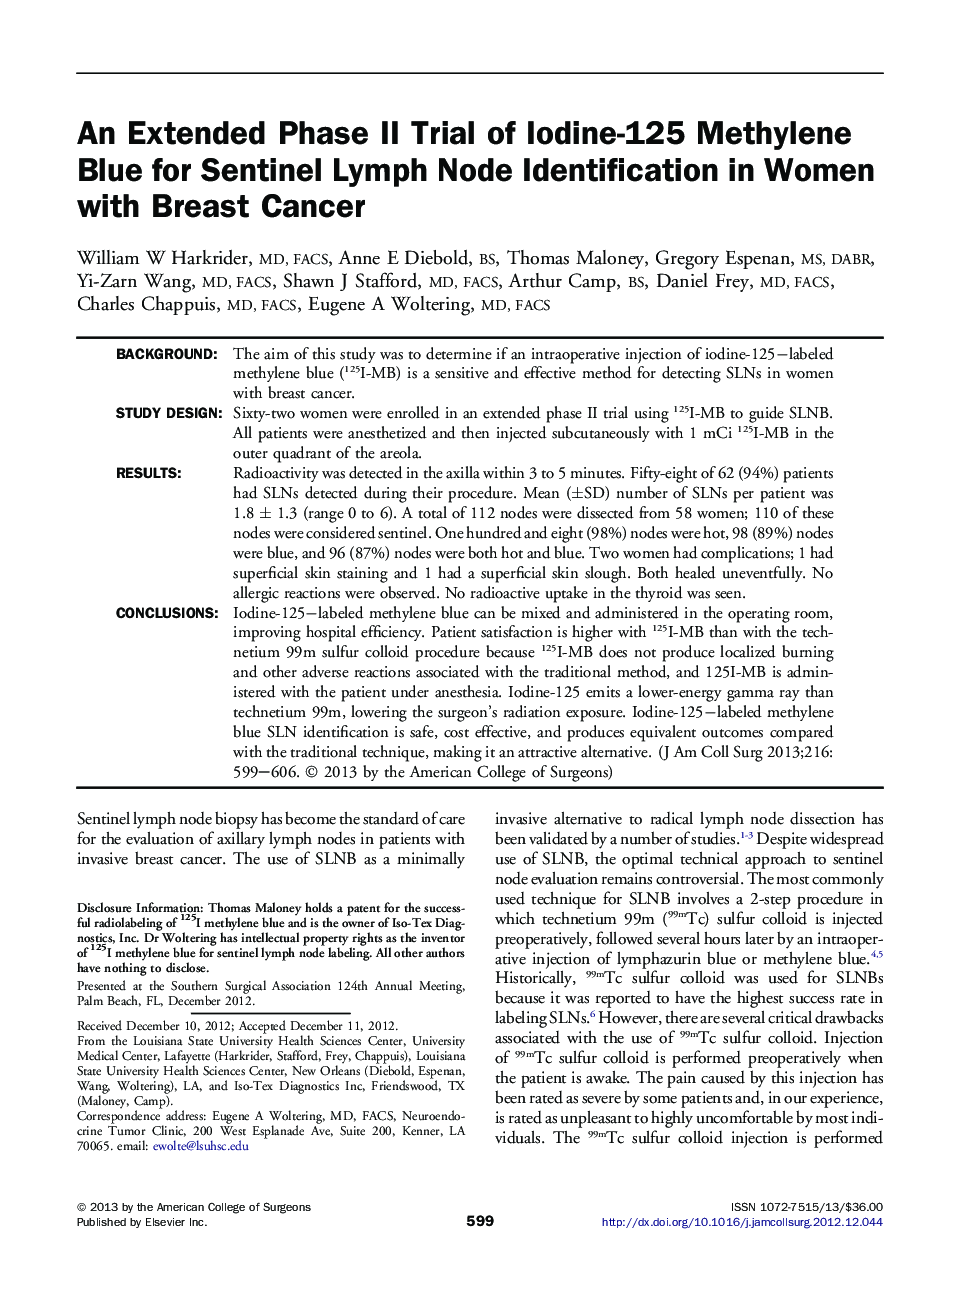 An Extended Phase II Trial of Iodine-125 Methylene Blue for Sentinel Lymph Node Identification in Women with Breast Cancer 